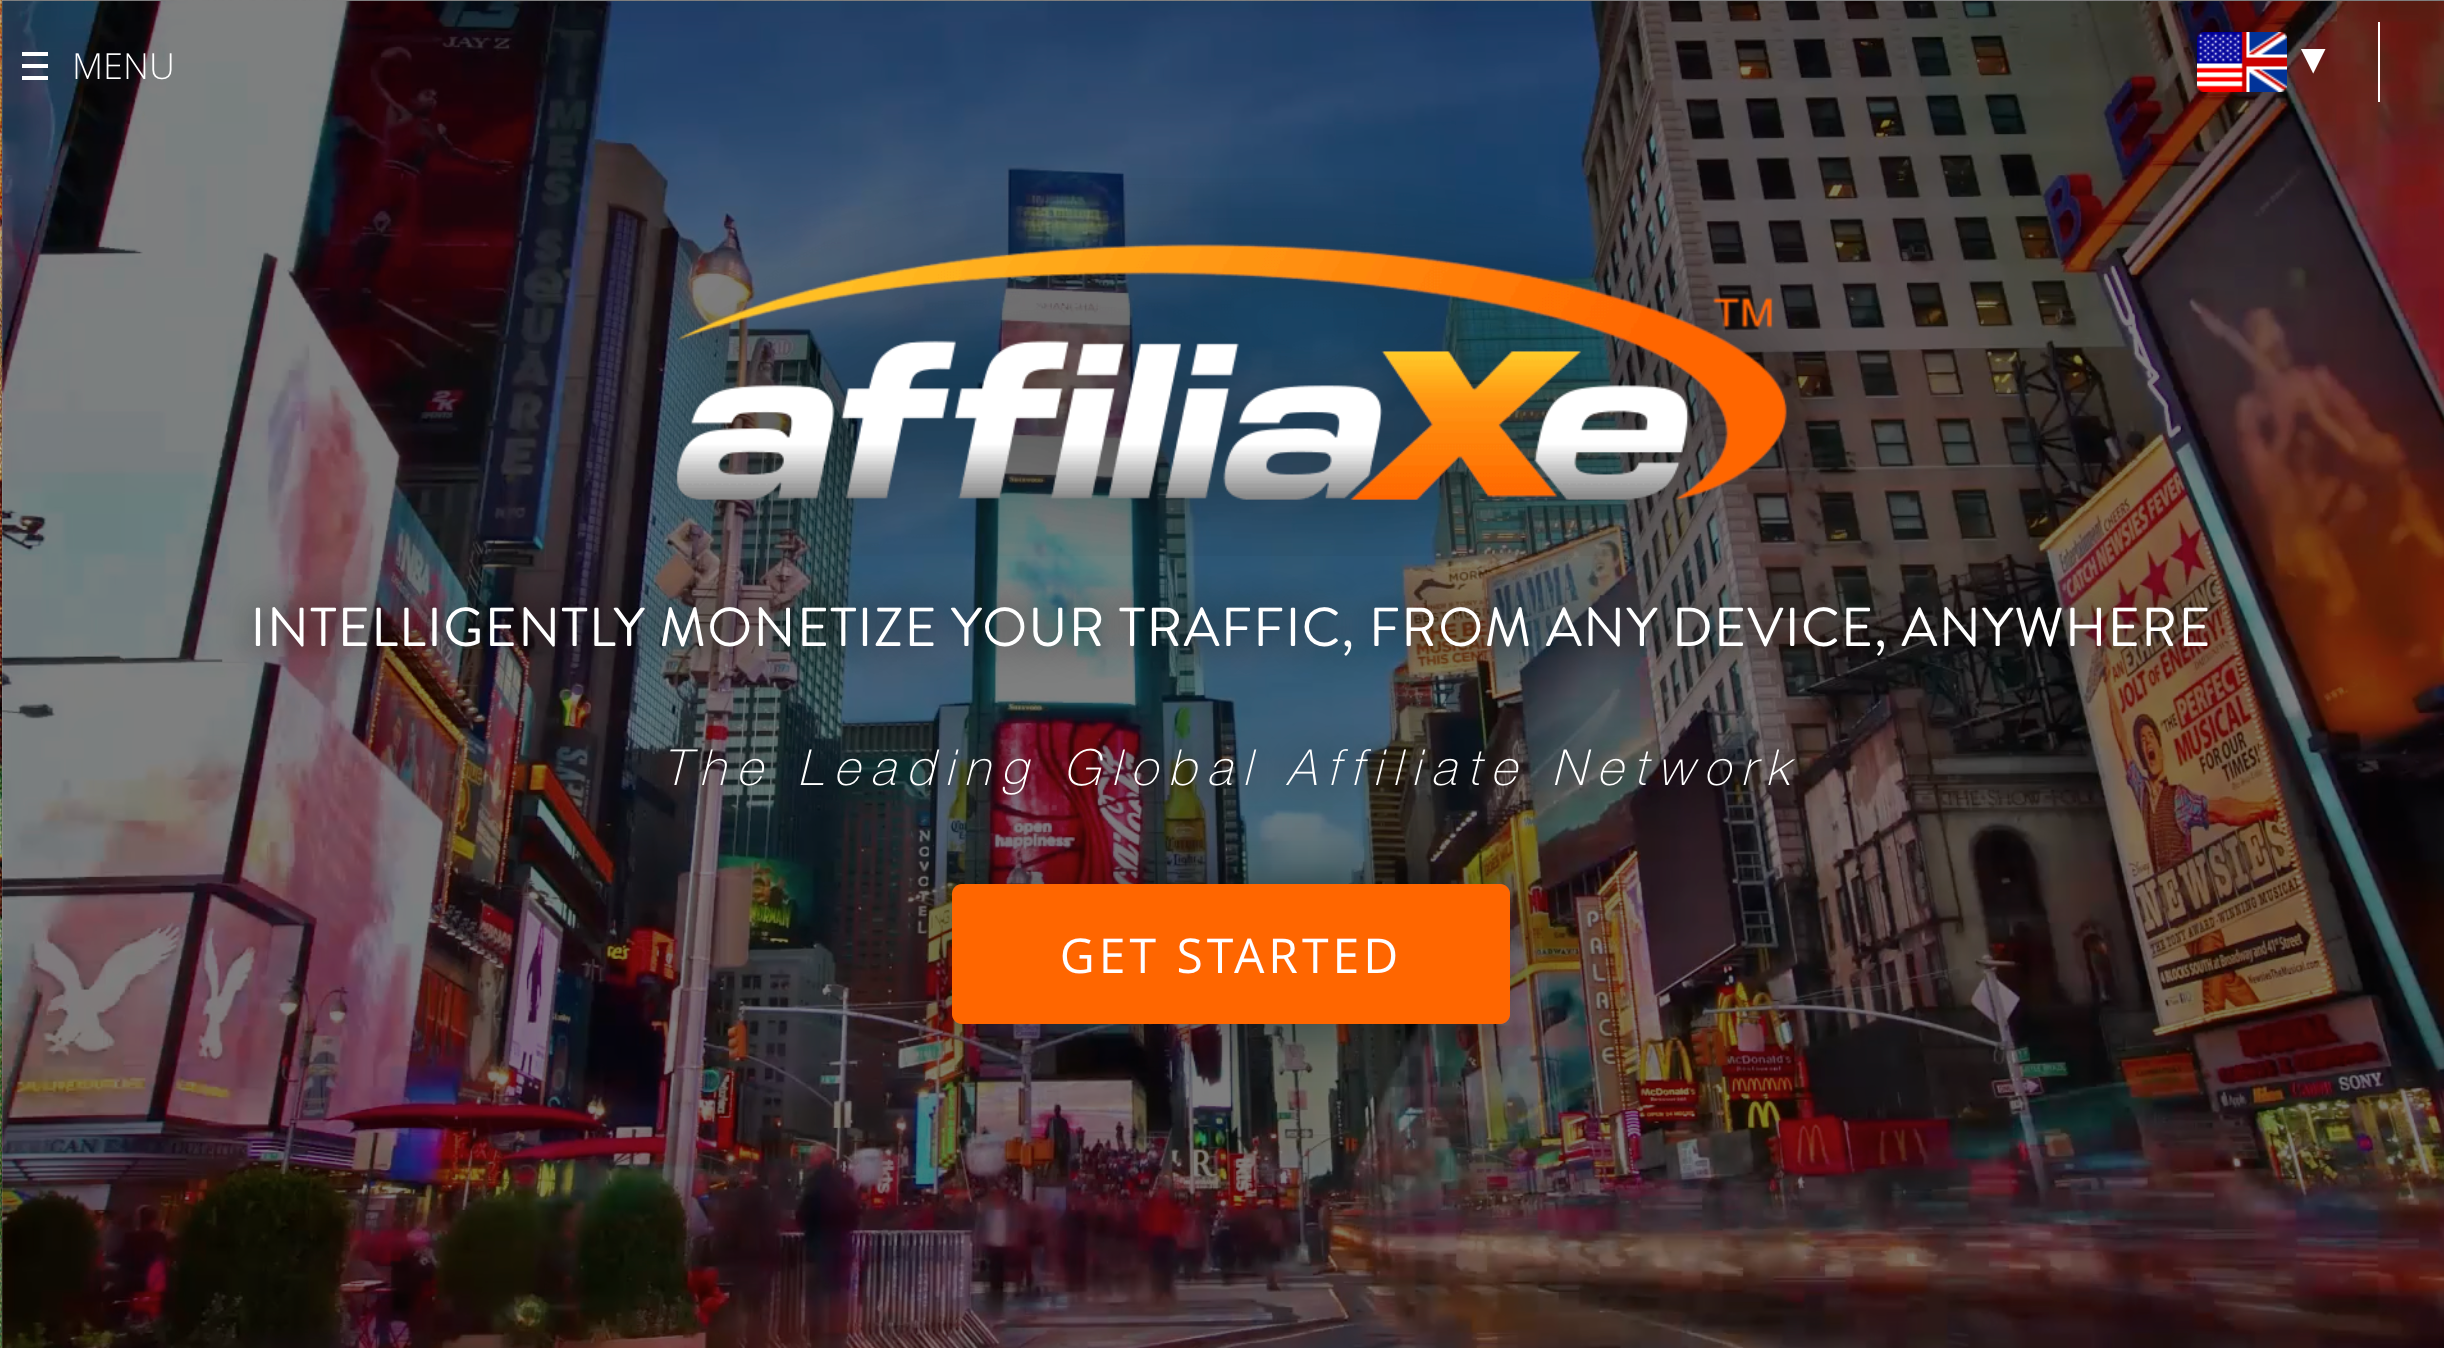 Screen grab of affiliaXe affiliate page with background image of tall buildings.